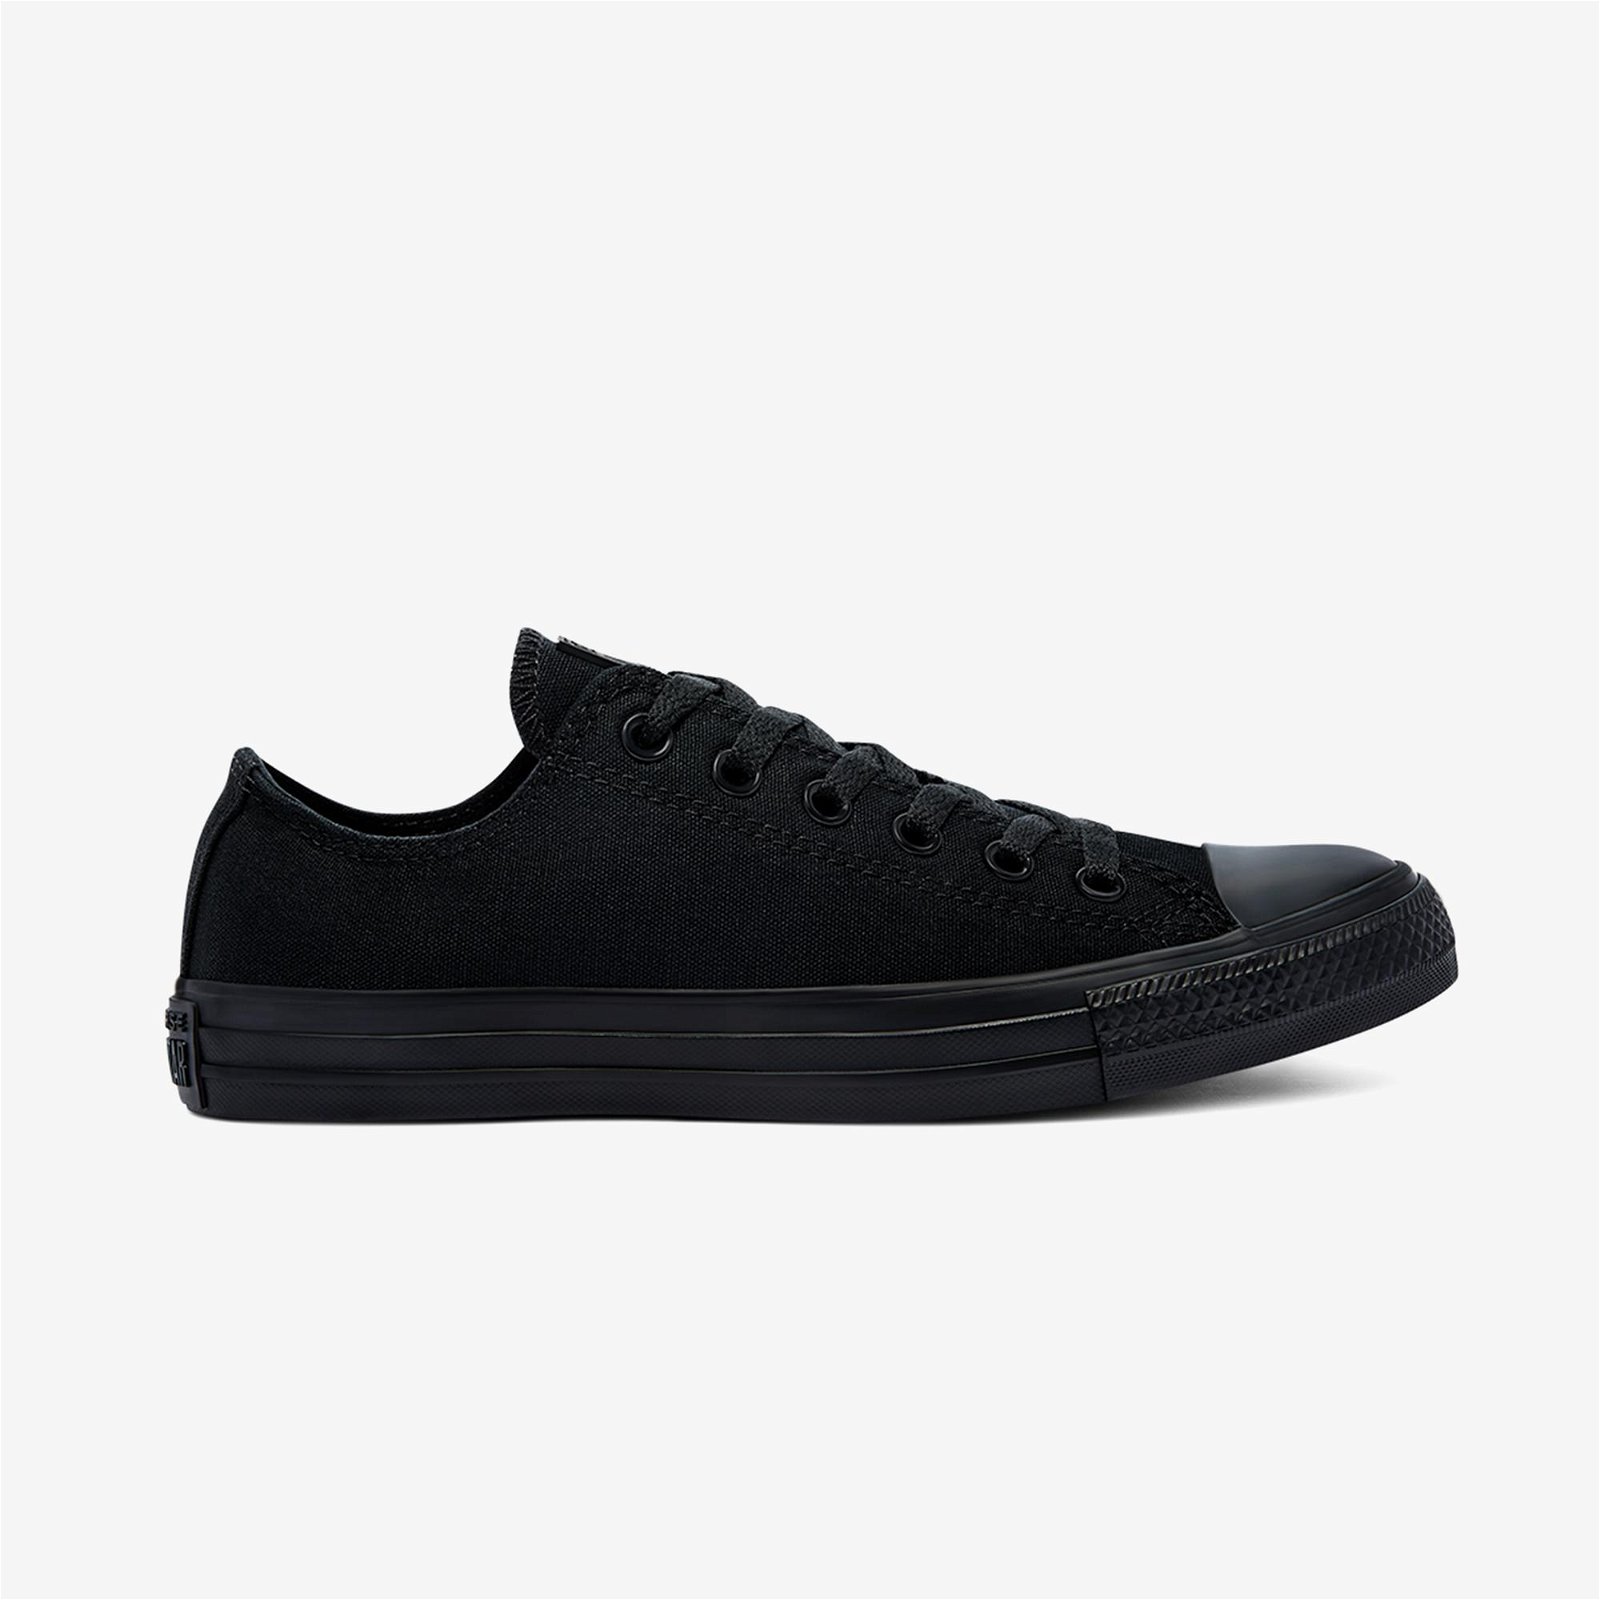 Converse Chuck Taylor All Star Low Unisex Siyah Sneaker